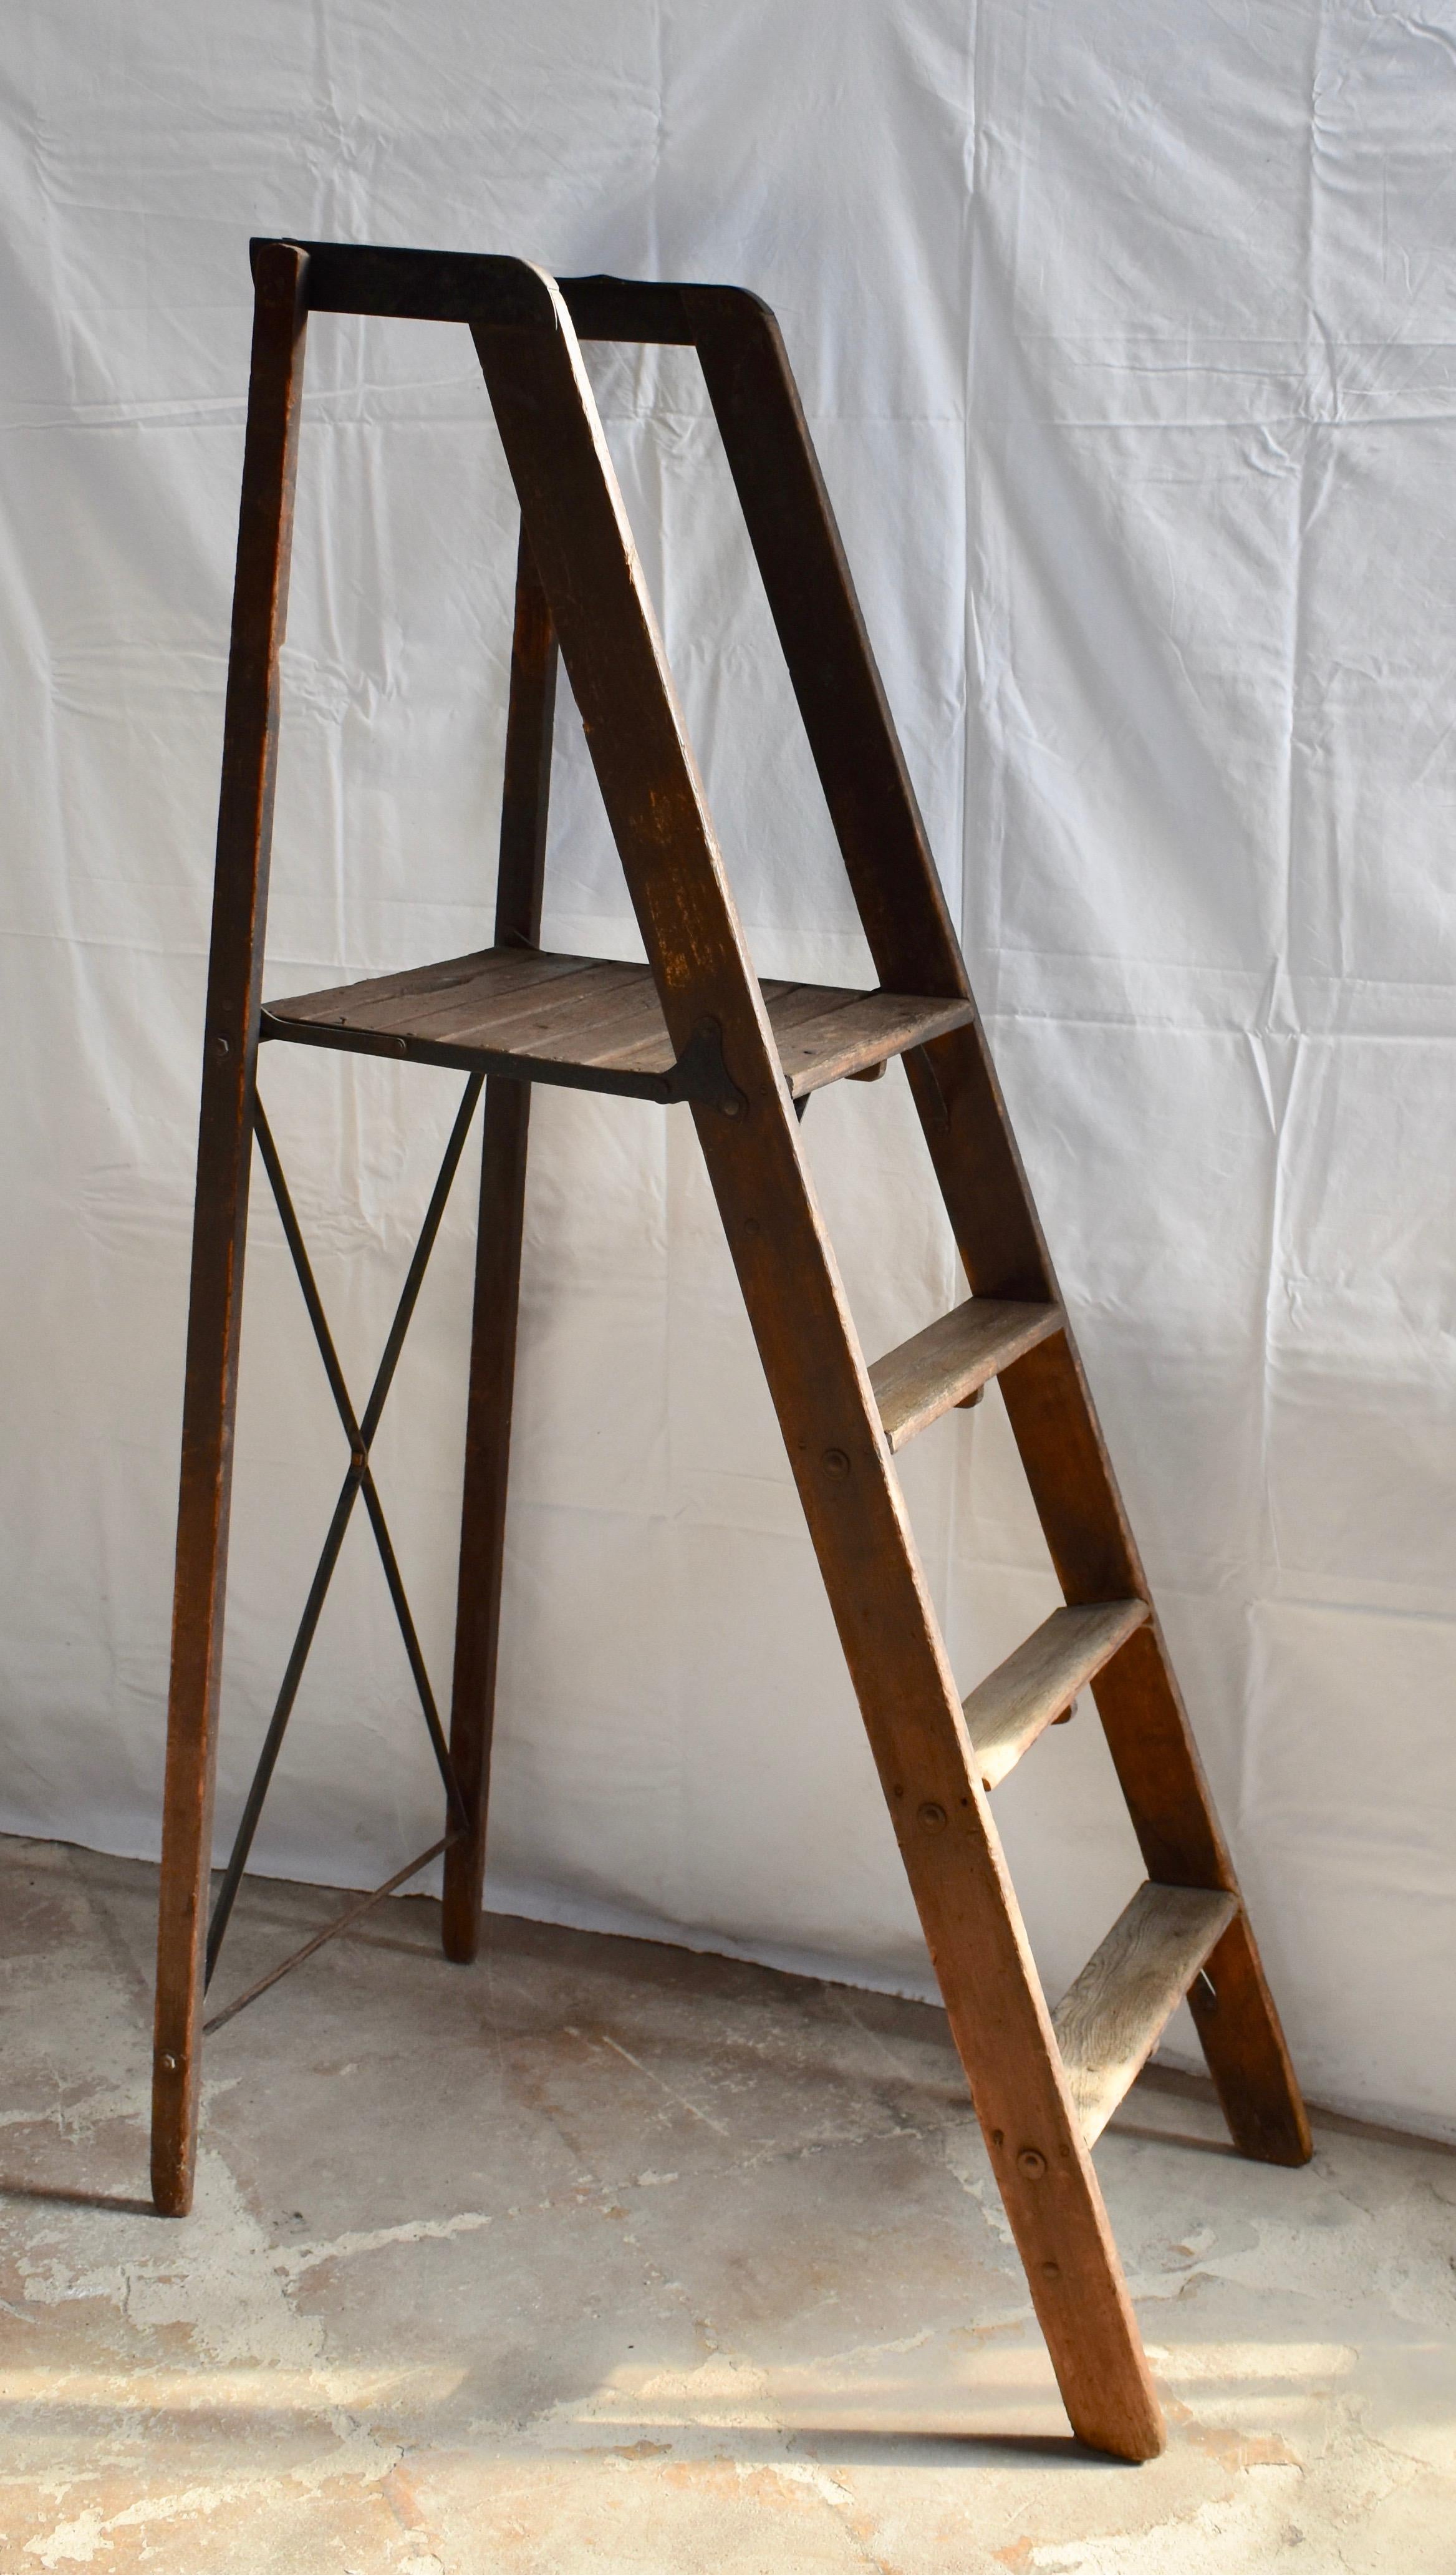 This pine and poplar folding library ladder has great form and color. All original wood and fasteners make this a wonderful decorative piece. Platform is 41